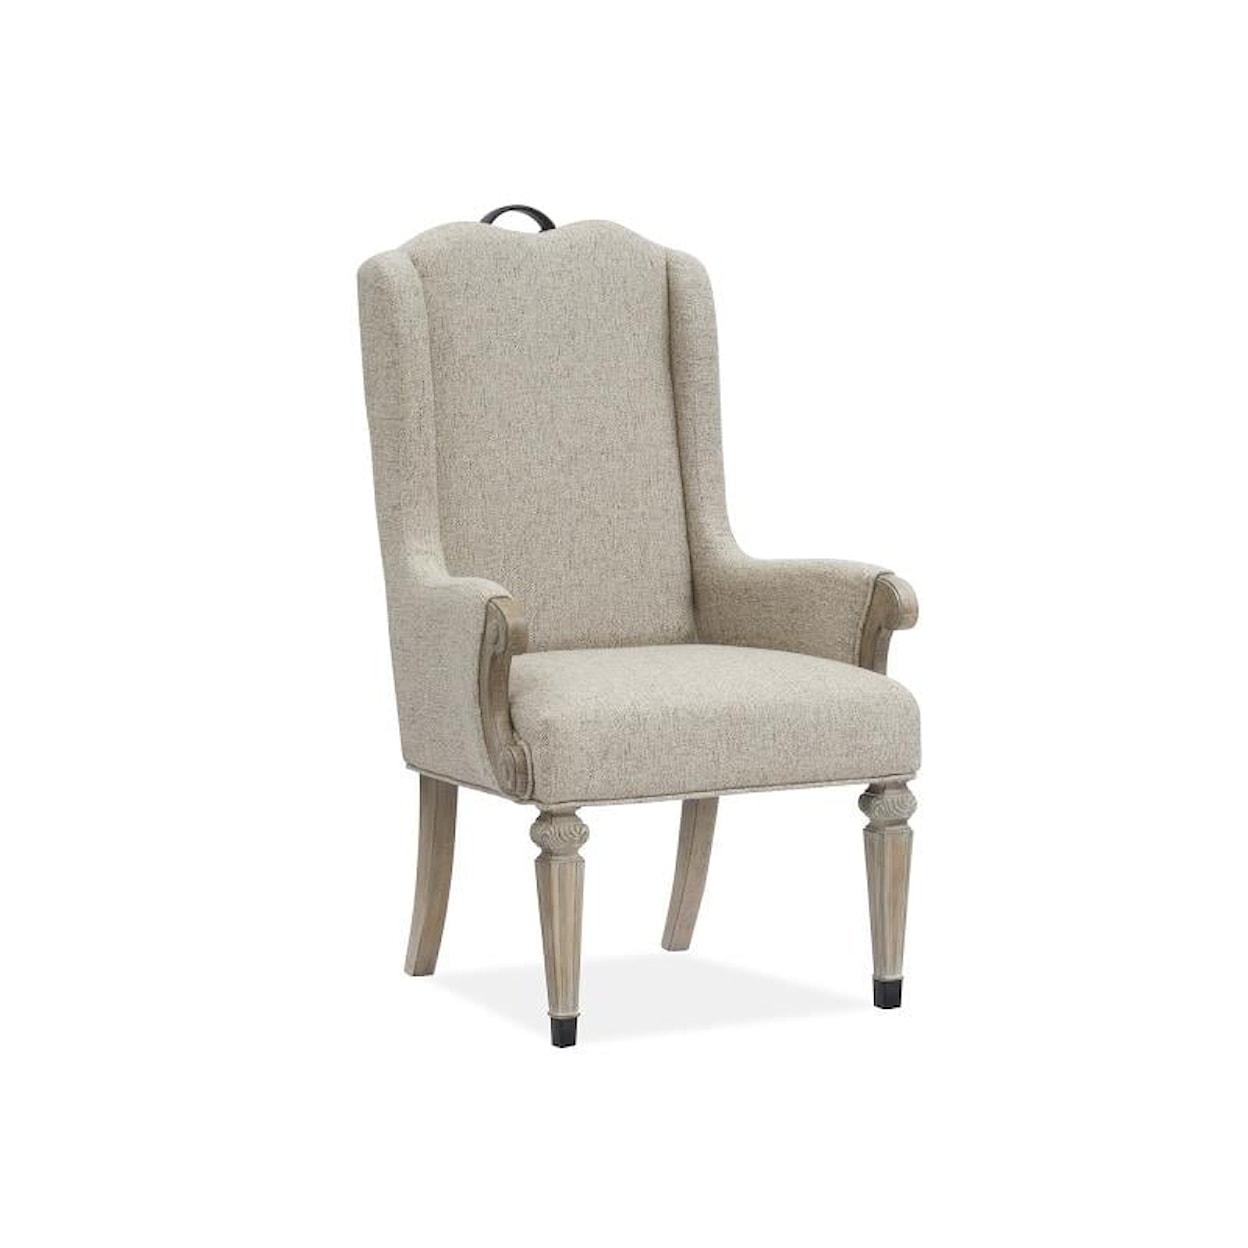 Magnussen Home Marisol Dining Upholstered Dining Arm Chair 